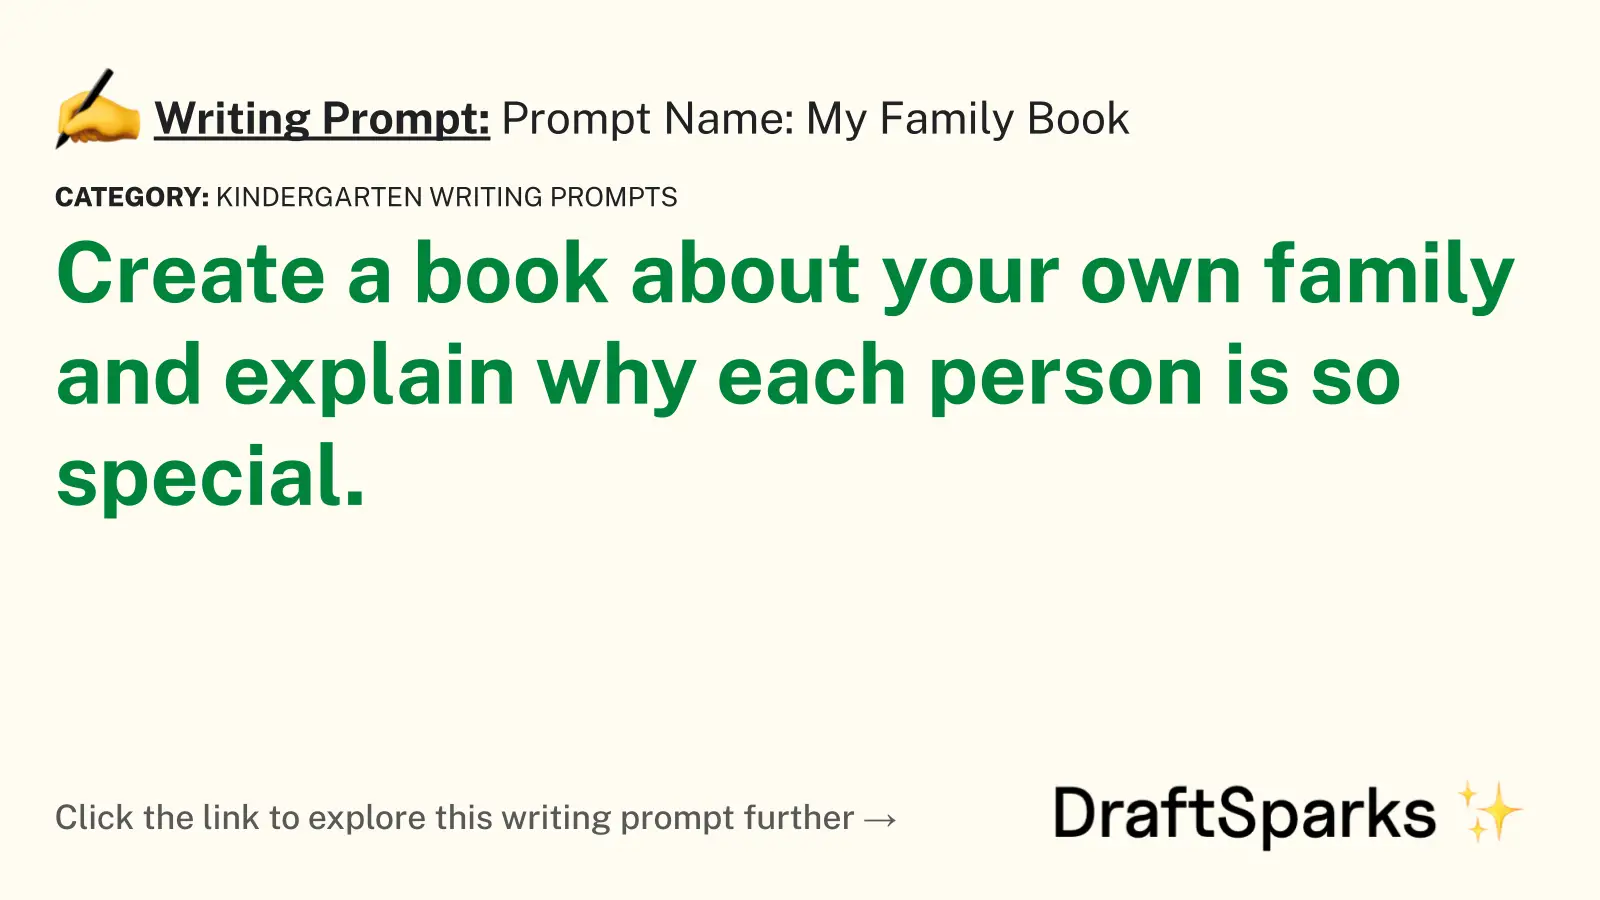 Prompt Name: My Family Book